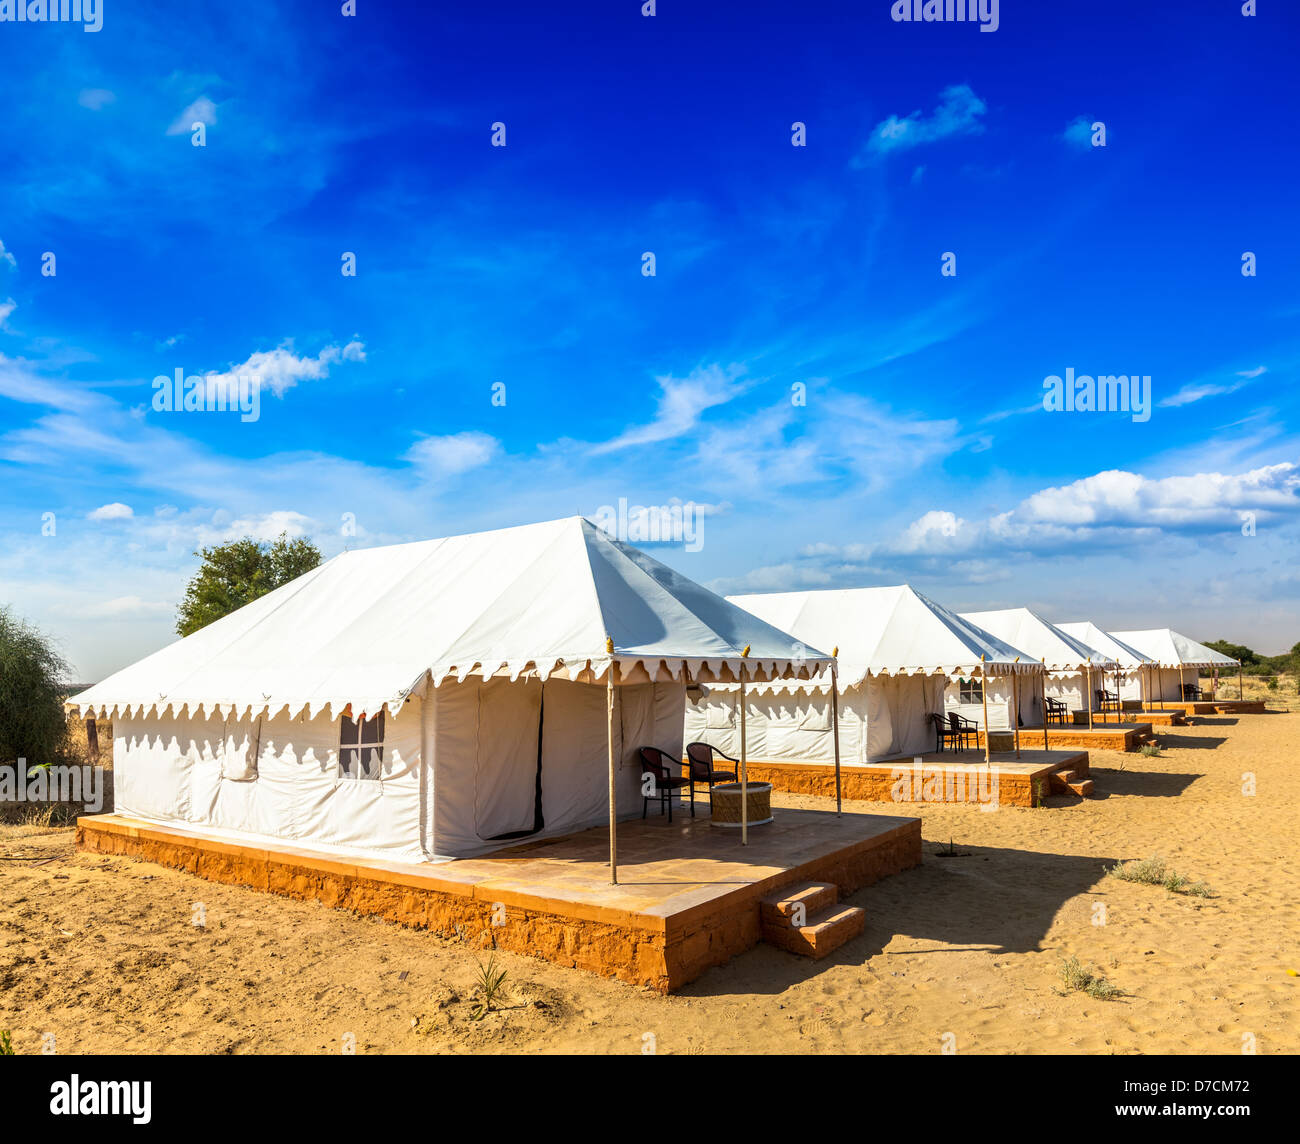 Rajasthan Desert Tent High Resolution Stock Photography and Images - Alamy